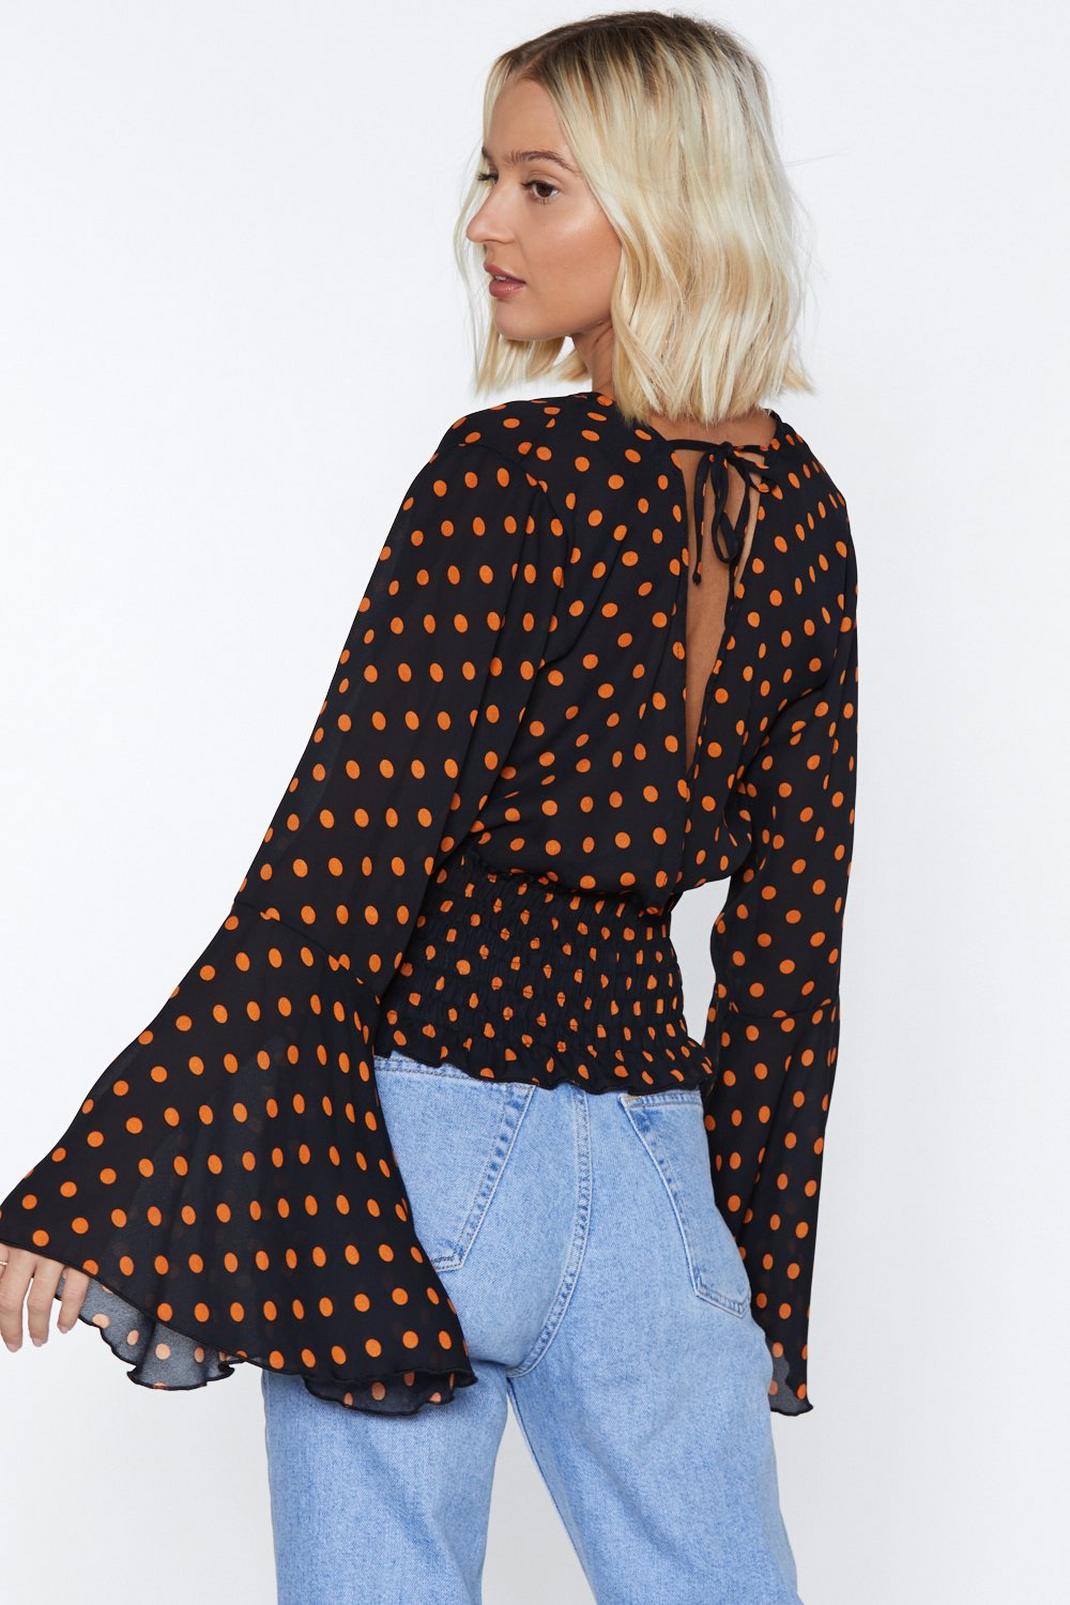 What's Love Dot to Do With It Polka Dot Top | Nasty Gal